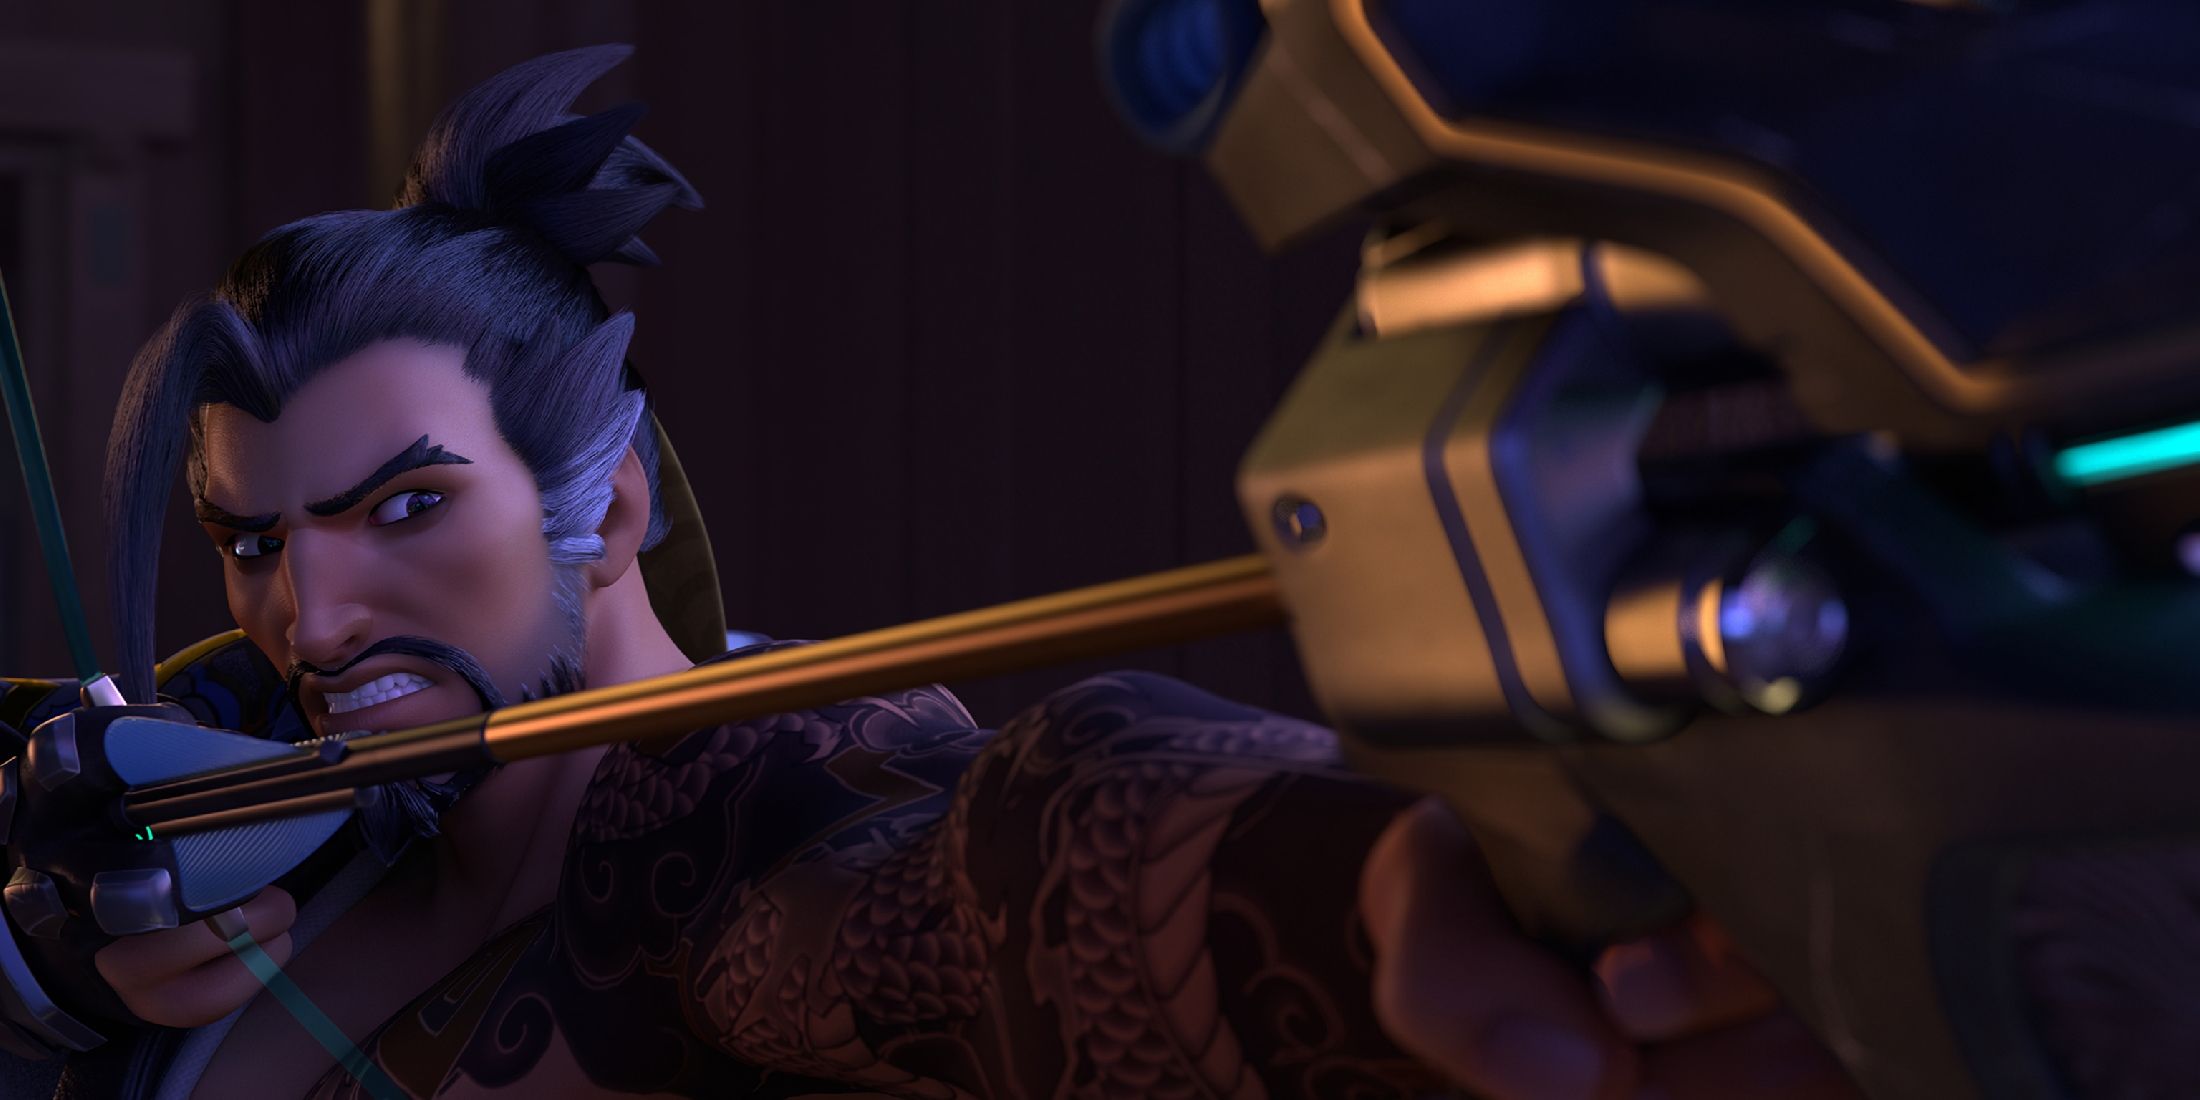 A promotional visual for Overwatch 2 Hero Hanzo